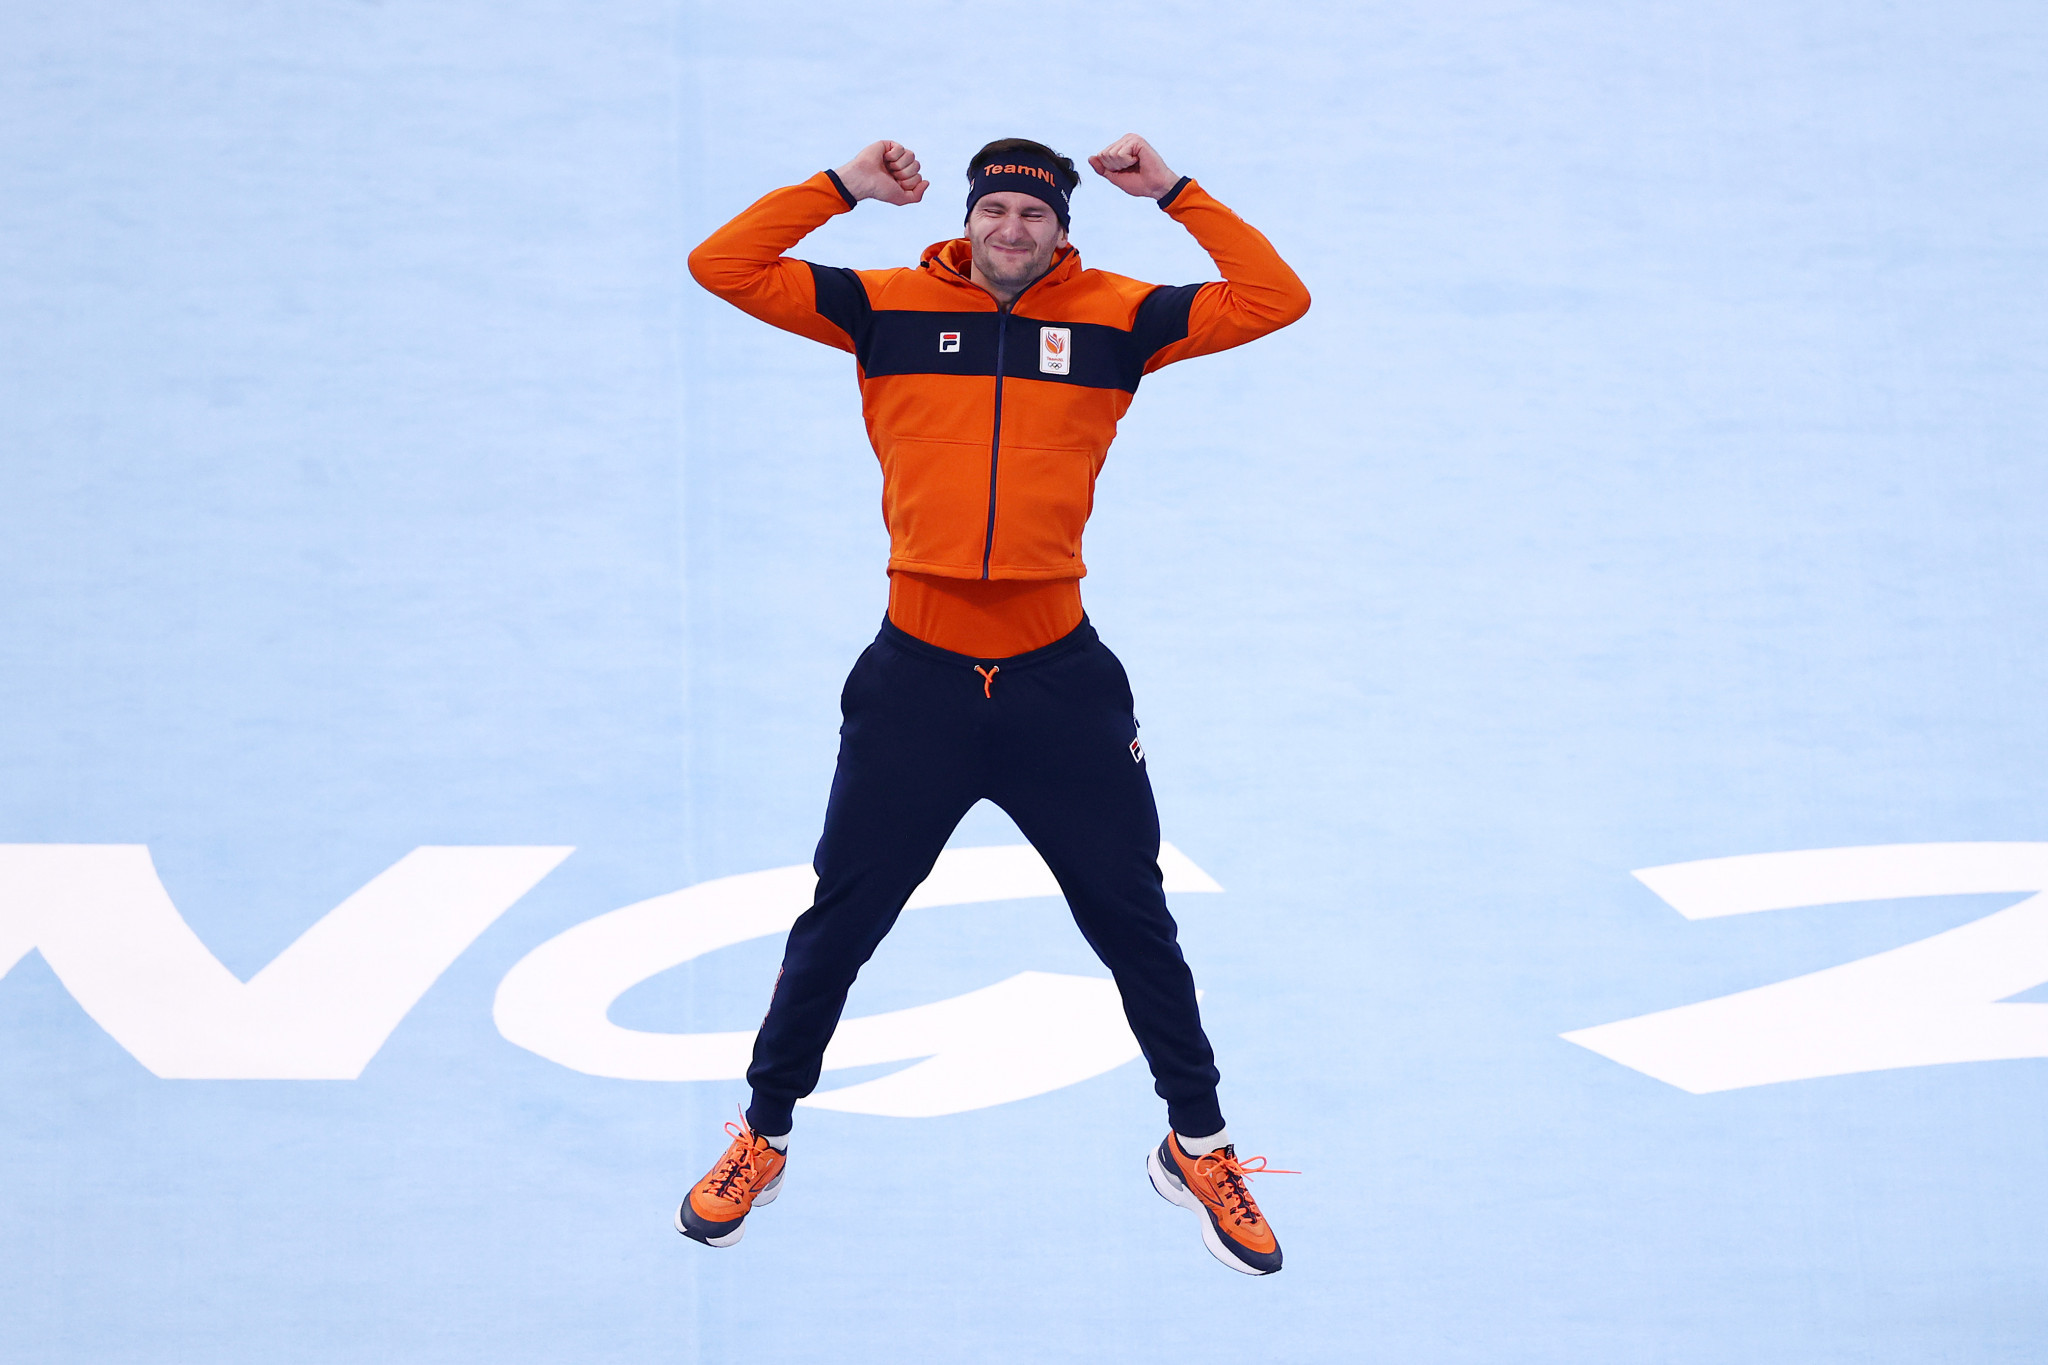 Thomas Krol jumps for joy after winning the men's 1000 metres speed skating gold ©Getty Images